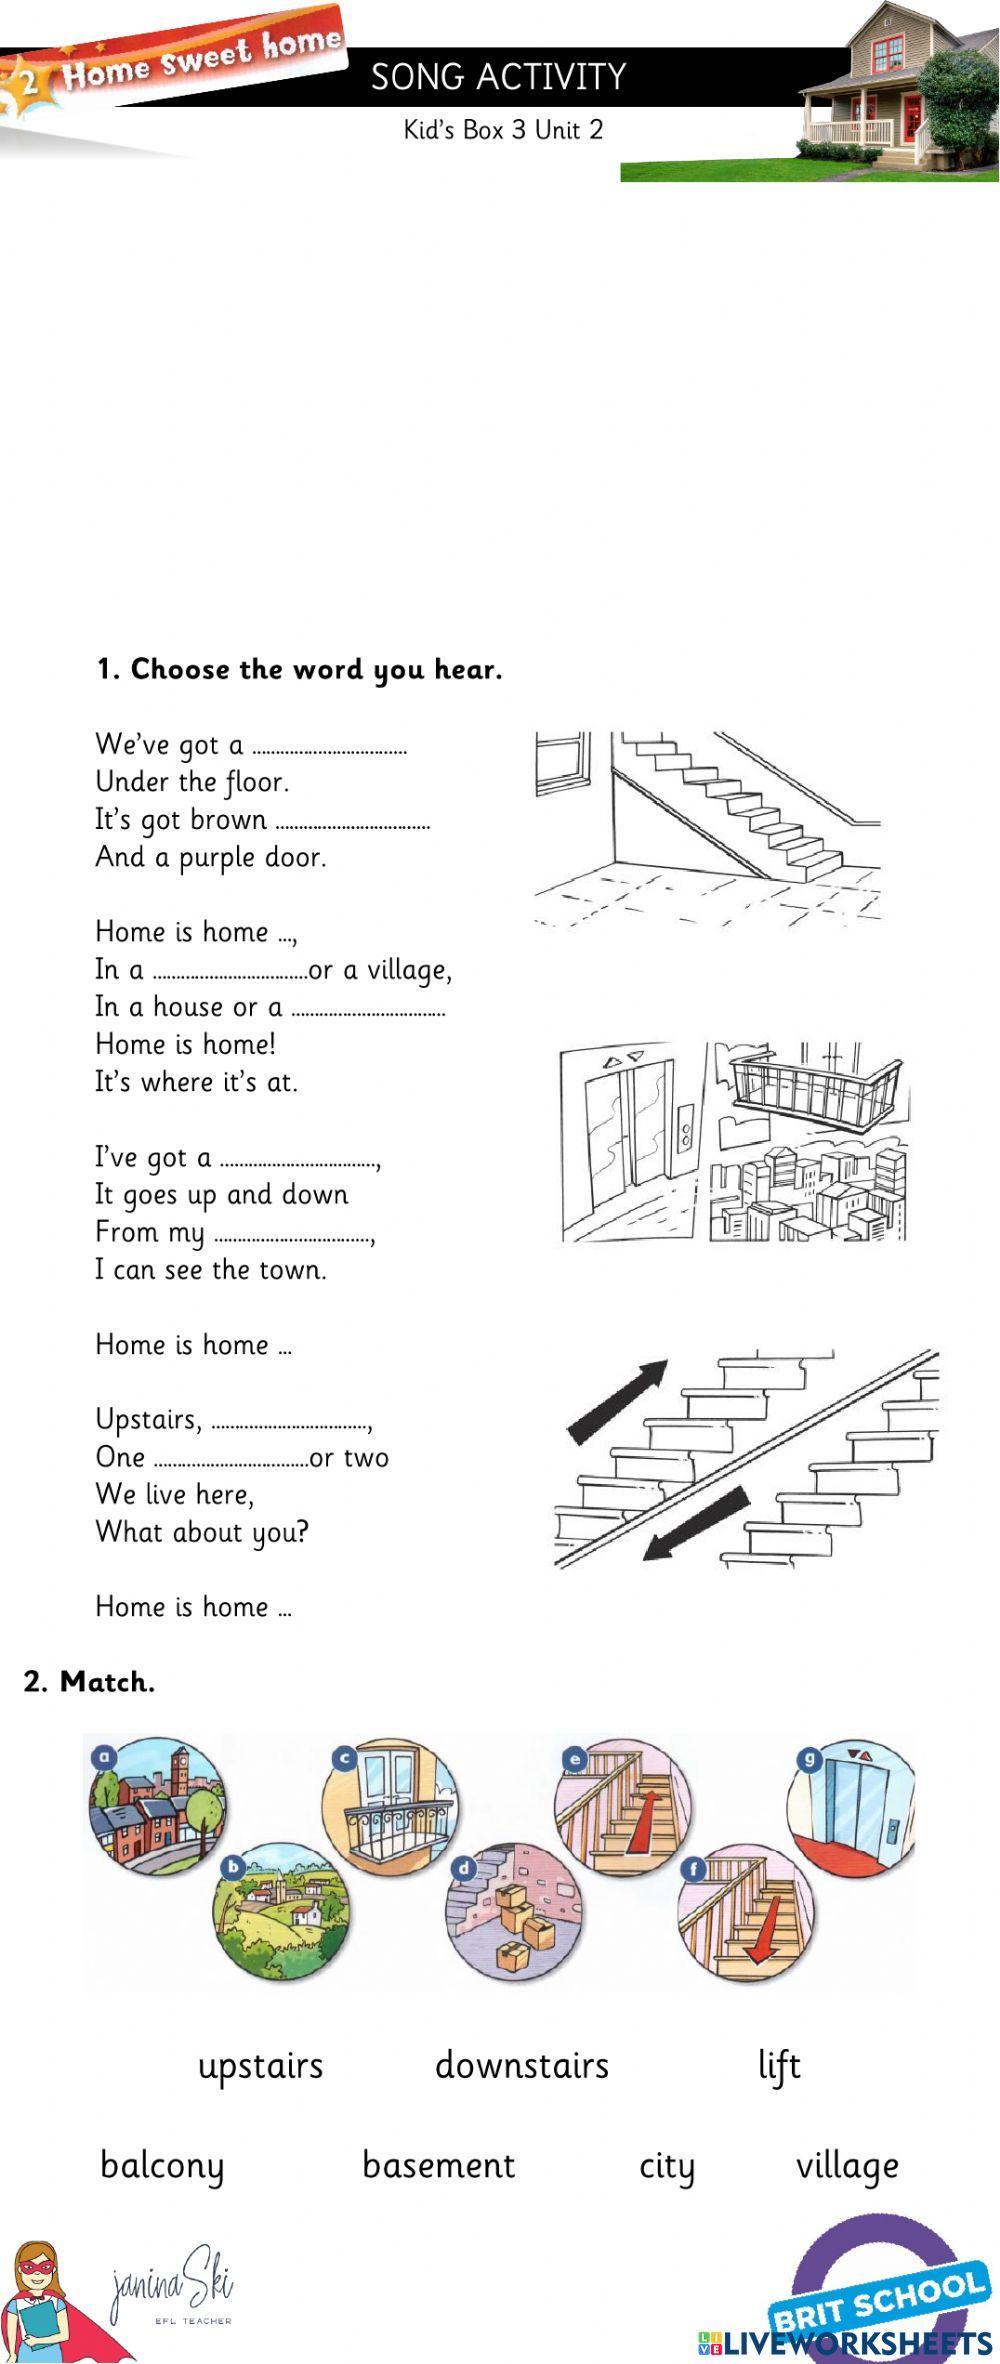 Song Activity-Home Sweet Home Kid's Box 3 Unit 2